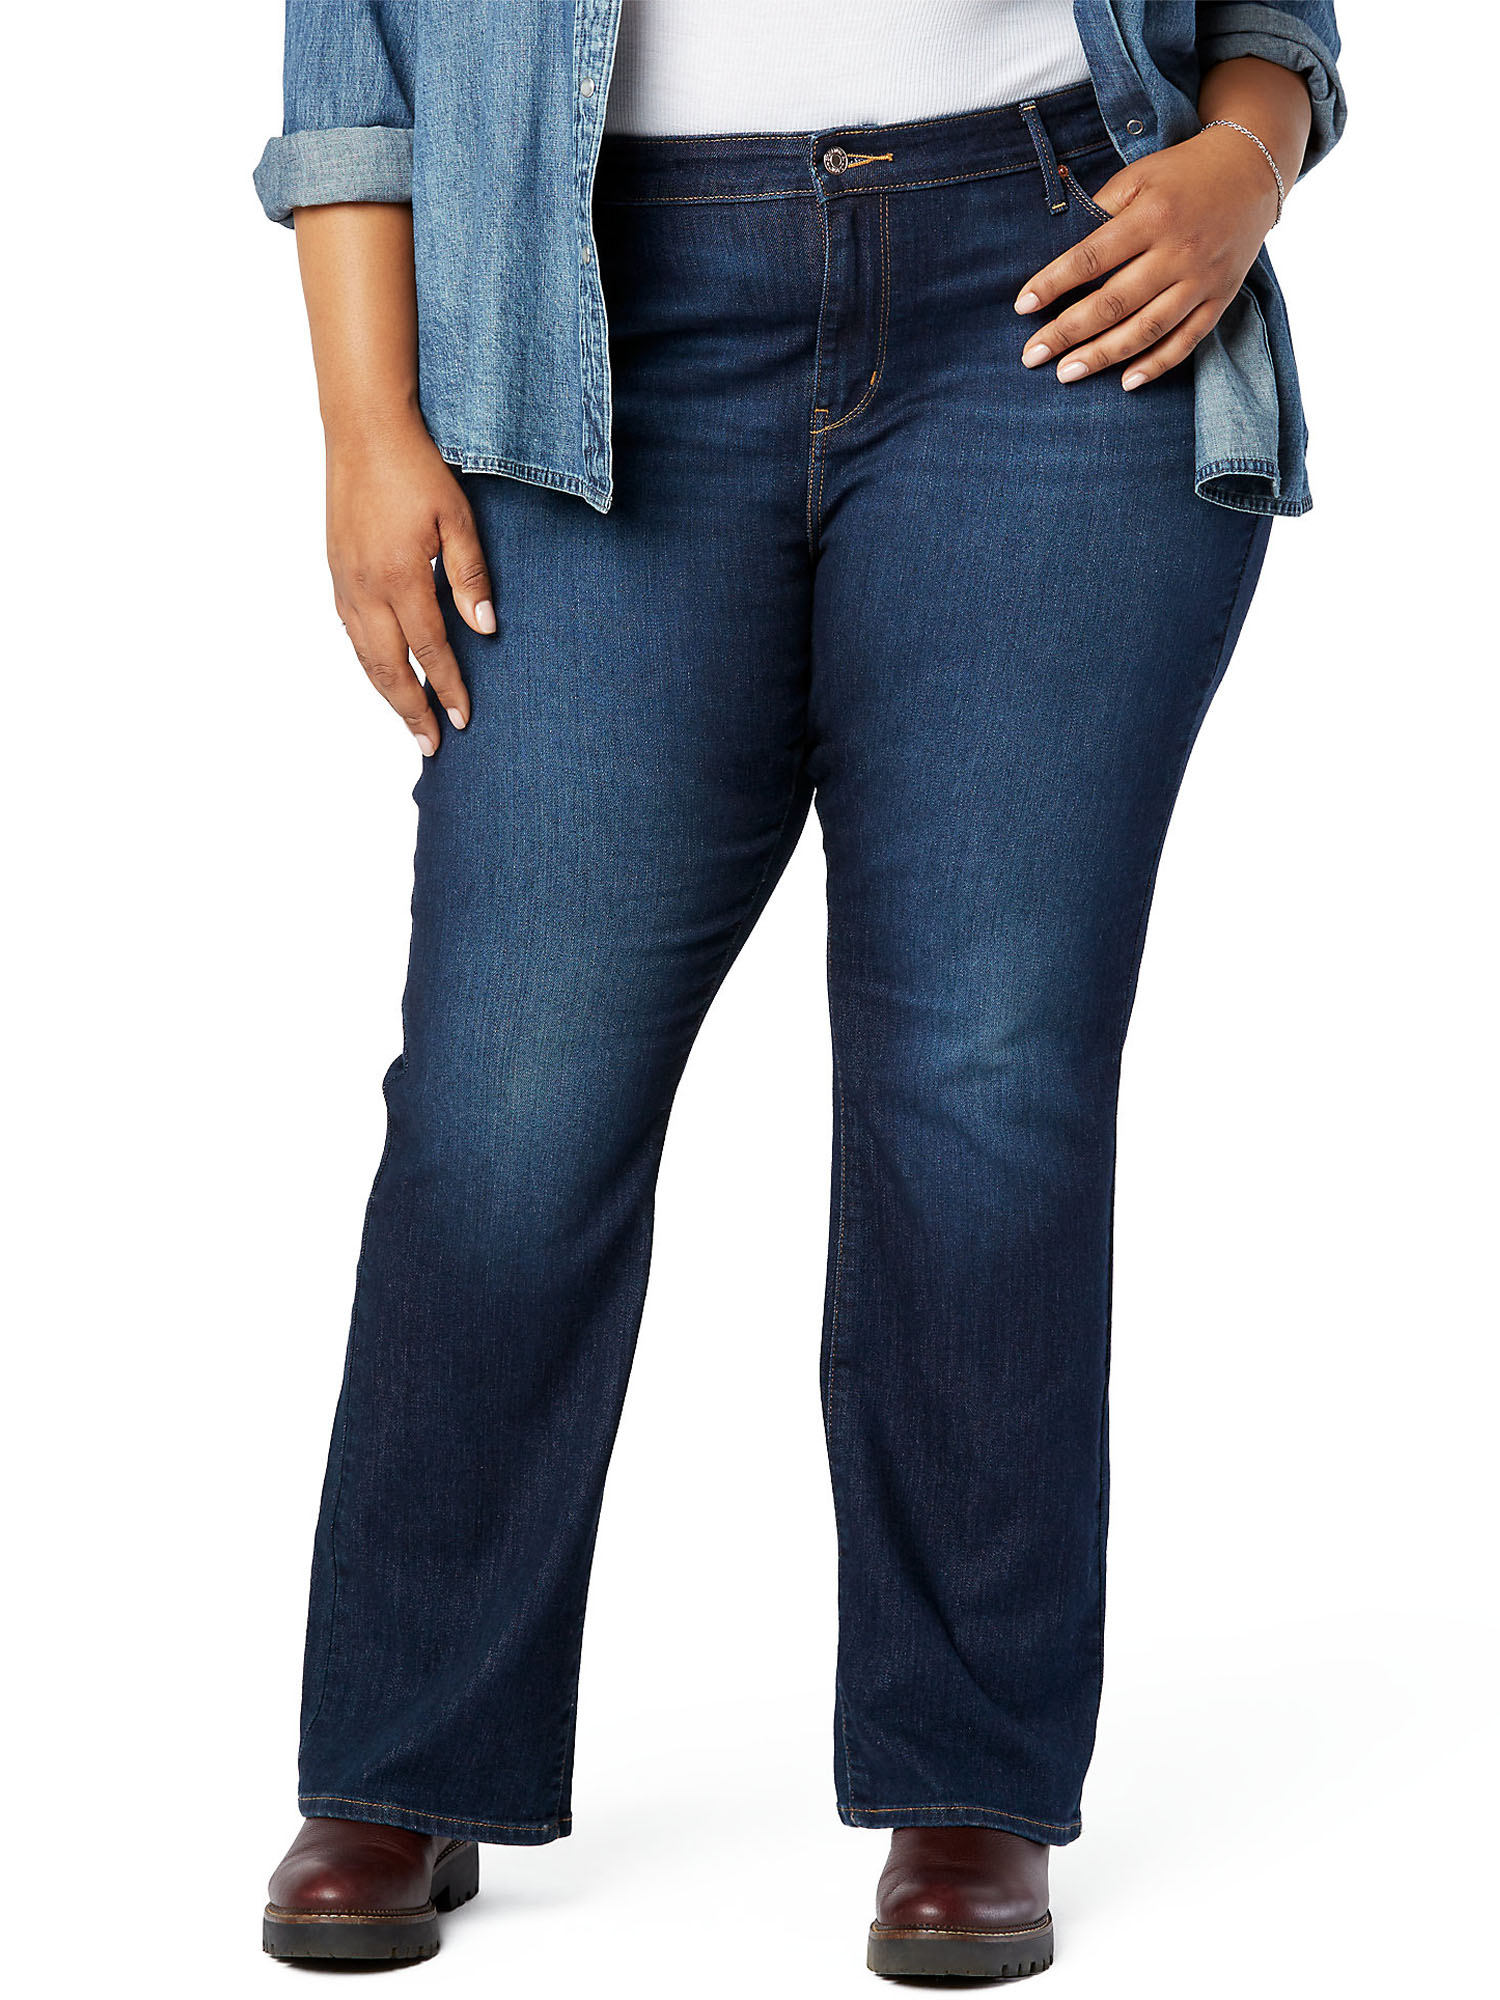 Signature by Levi Strauss & Co. Women's and Women's Plus Modern Bootcut Jeans - image 1 of 4